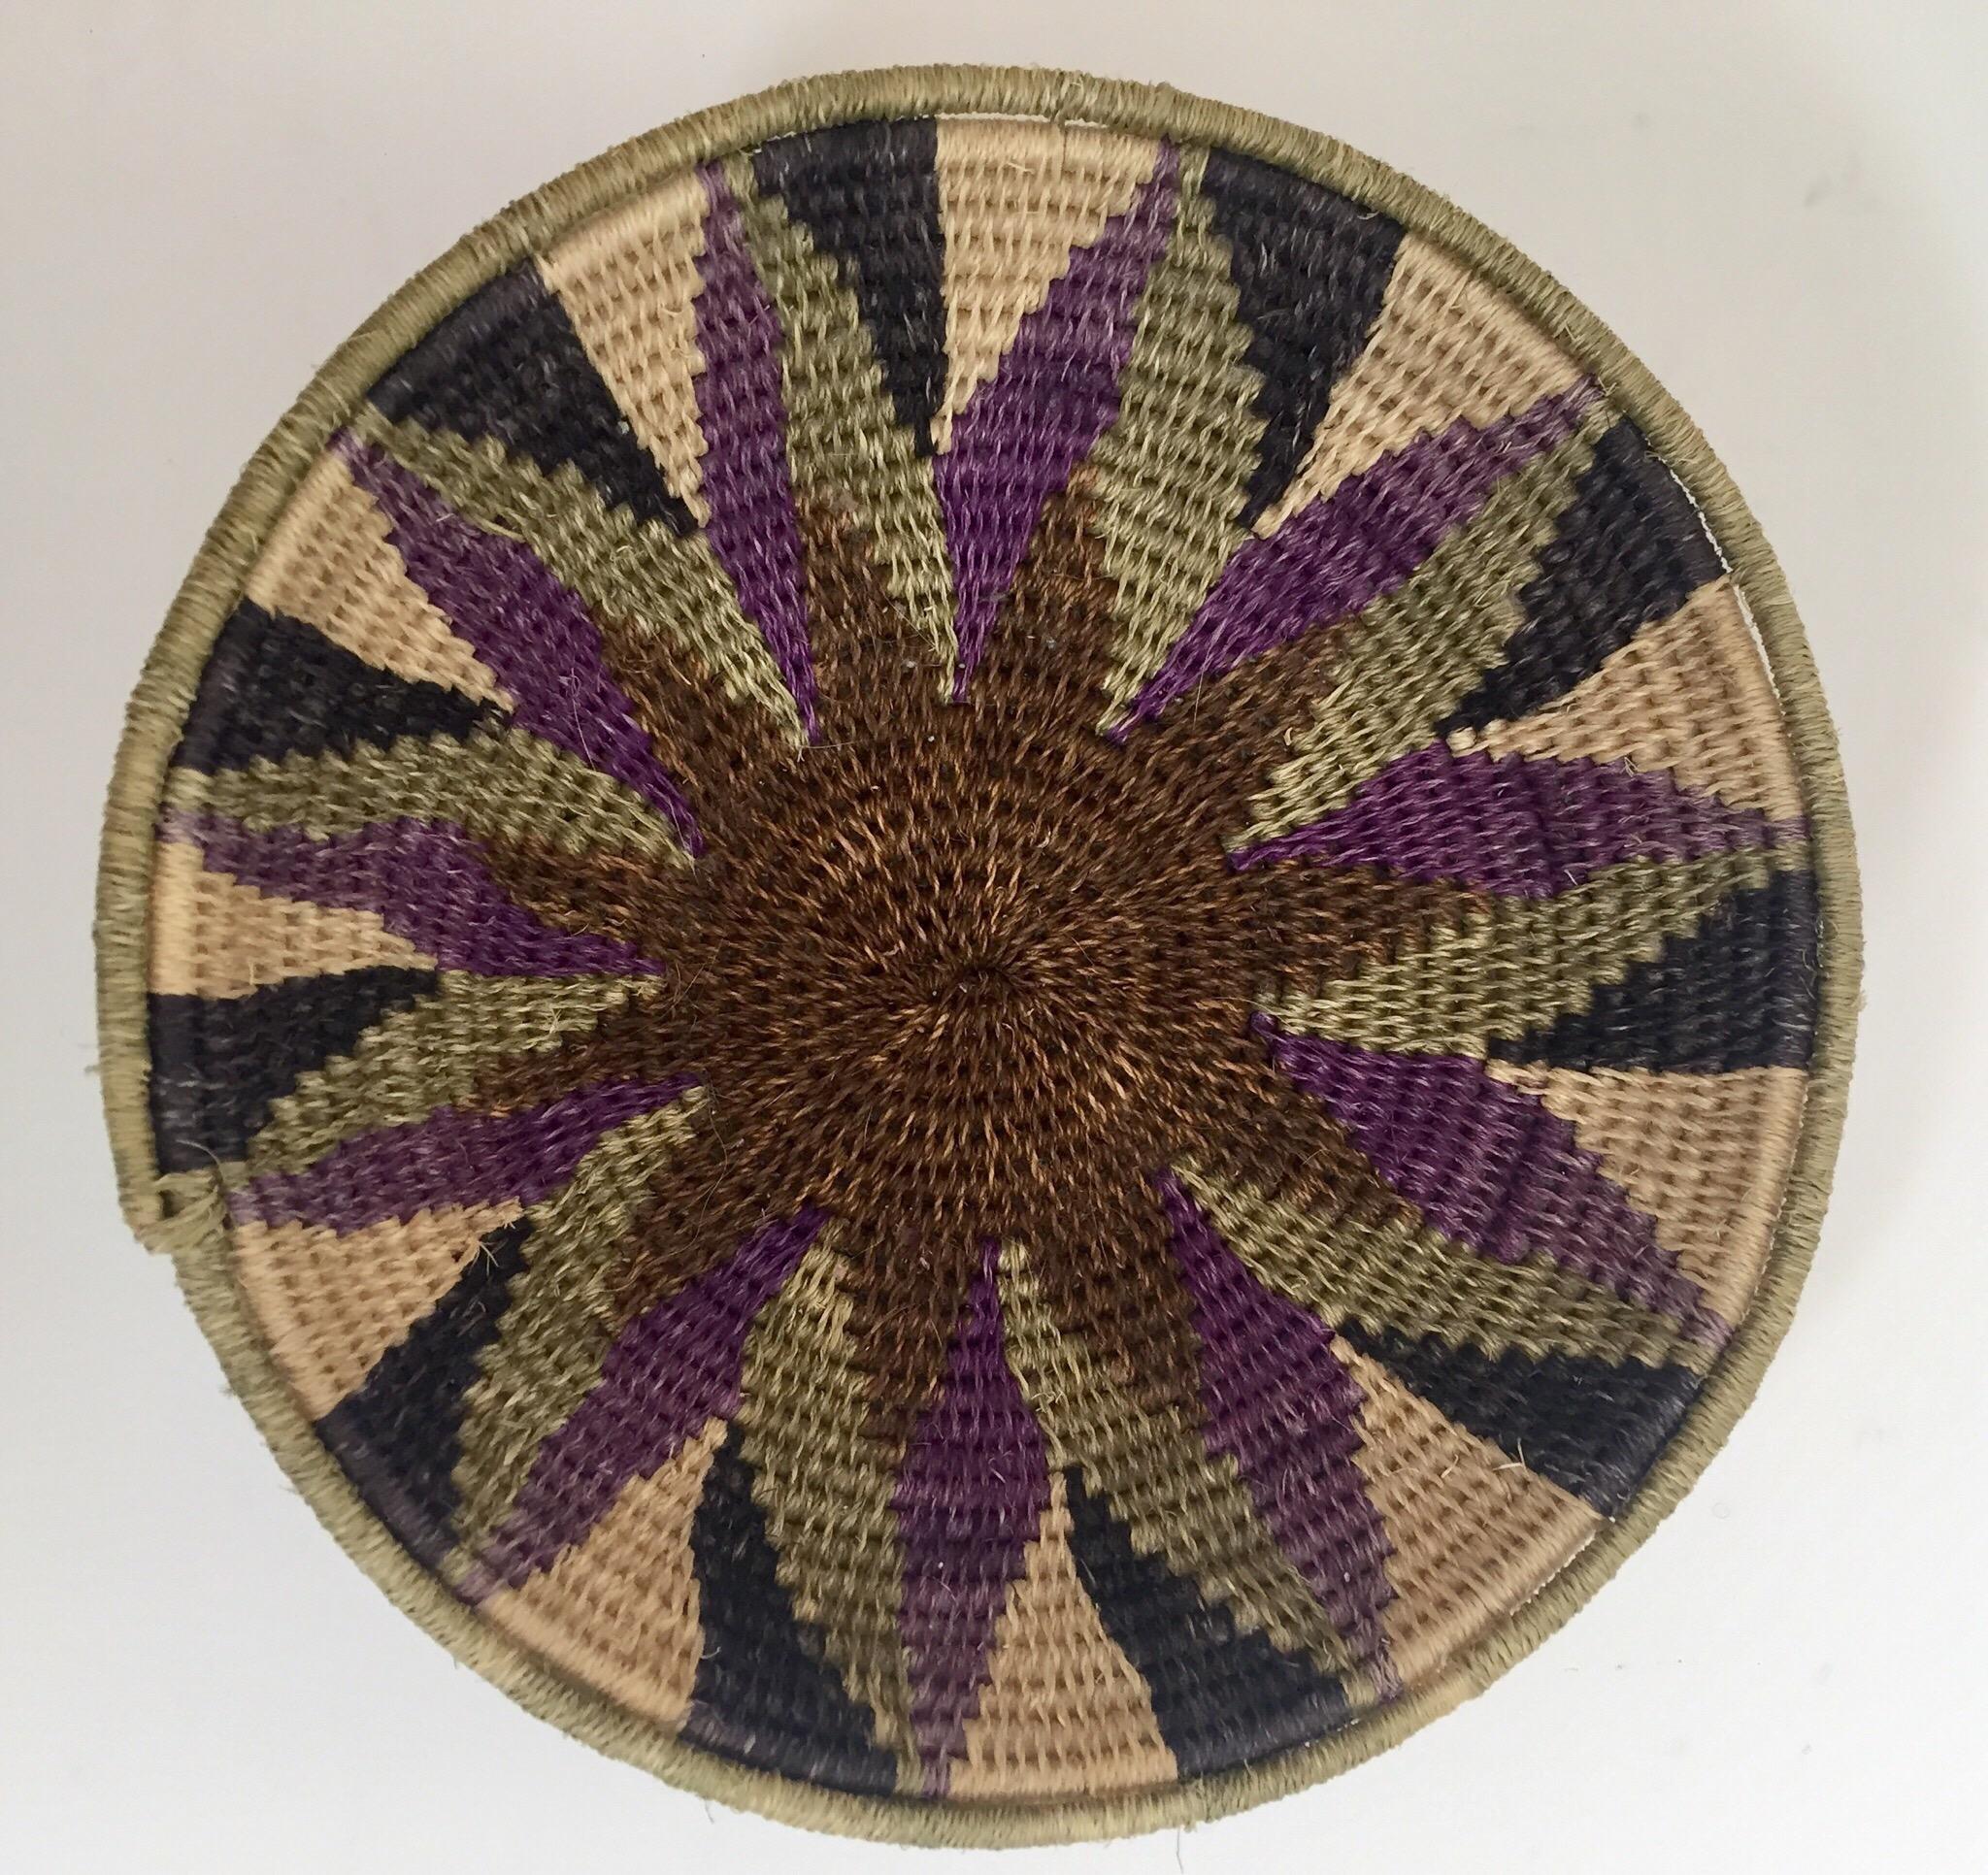 African polychrome seagrass and silk woven basket. 
Beautiful round shape with geometric designs woven into the sides. 
Very fine craft work, great Folk Art tribal collector piece.
Dimensions: 6.5